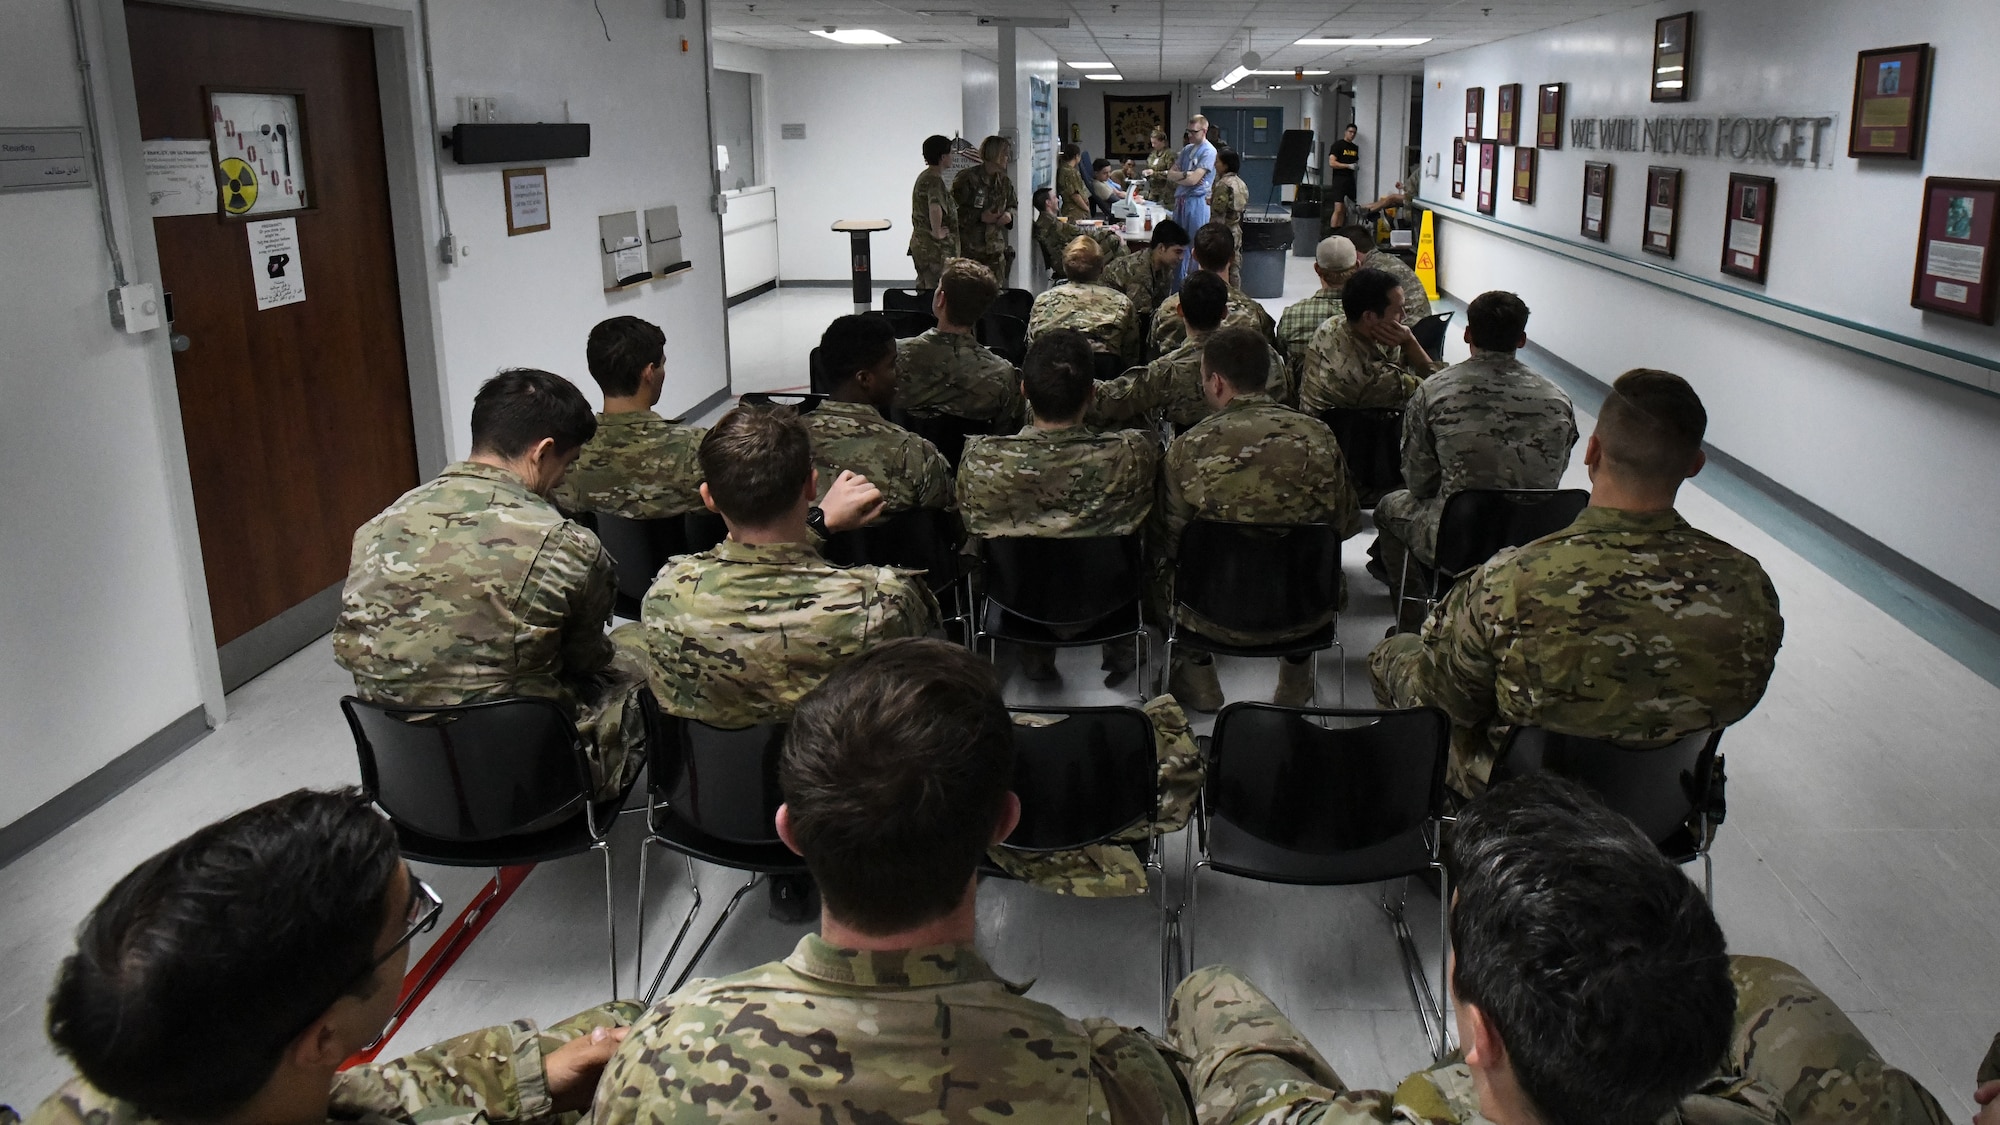 Service members wait in line to donate blood at Craig Joint Theater Hospital, Bagram Airfield, Afghanistan as part of a "walking blood bank" for a fellow service member being transferred to Brooke Army Medical Center, San Antonio, Texas, Aug. 18, 2019. A request for volunteers with a specific blood type was filled within minutes, providing fresh whole blood to sustain the patient during the 20-hour direct flight home. (U.S. Air Force photo by Airman 1st Class Ryan Mancuso)